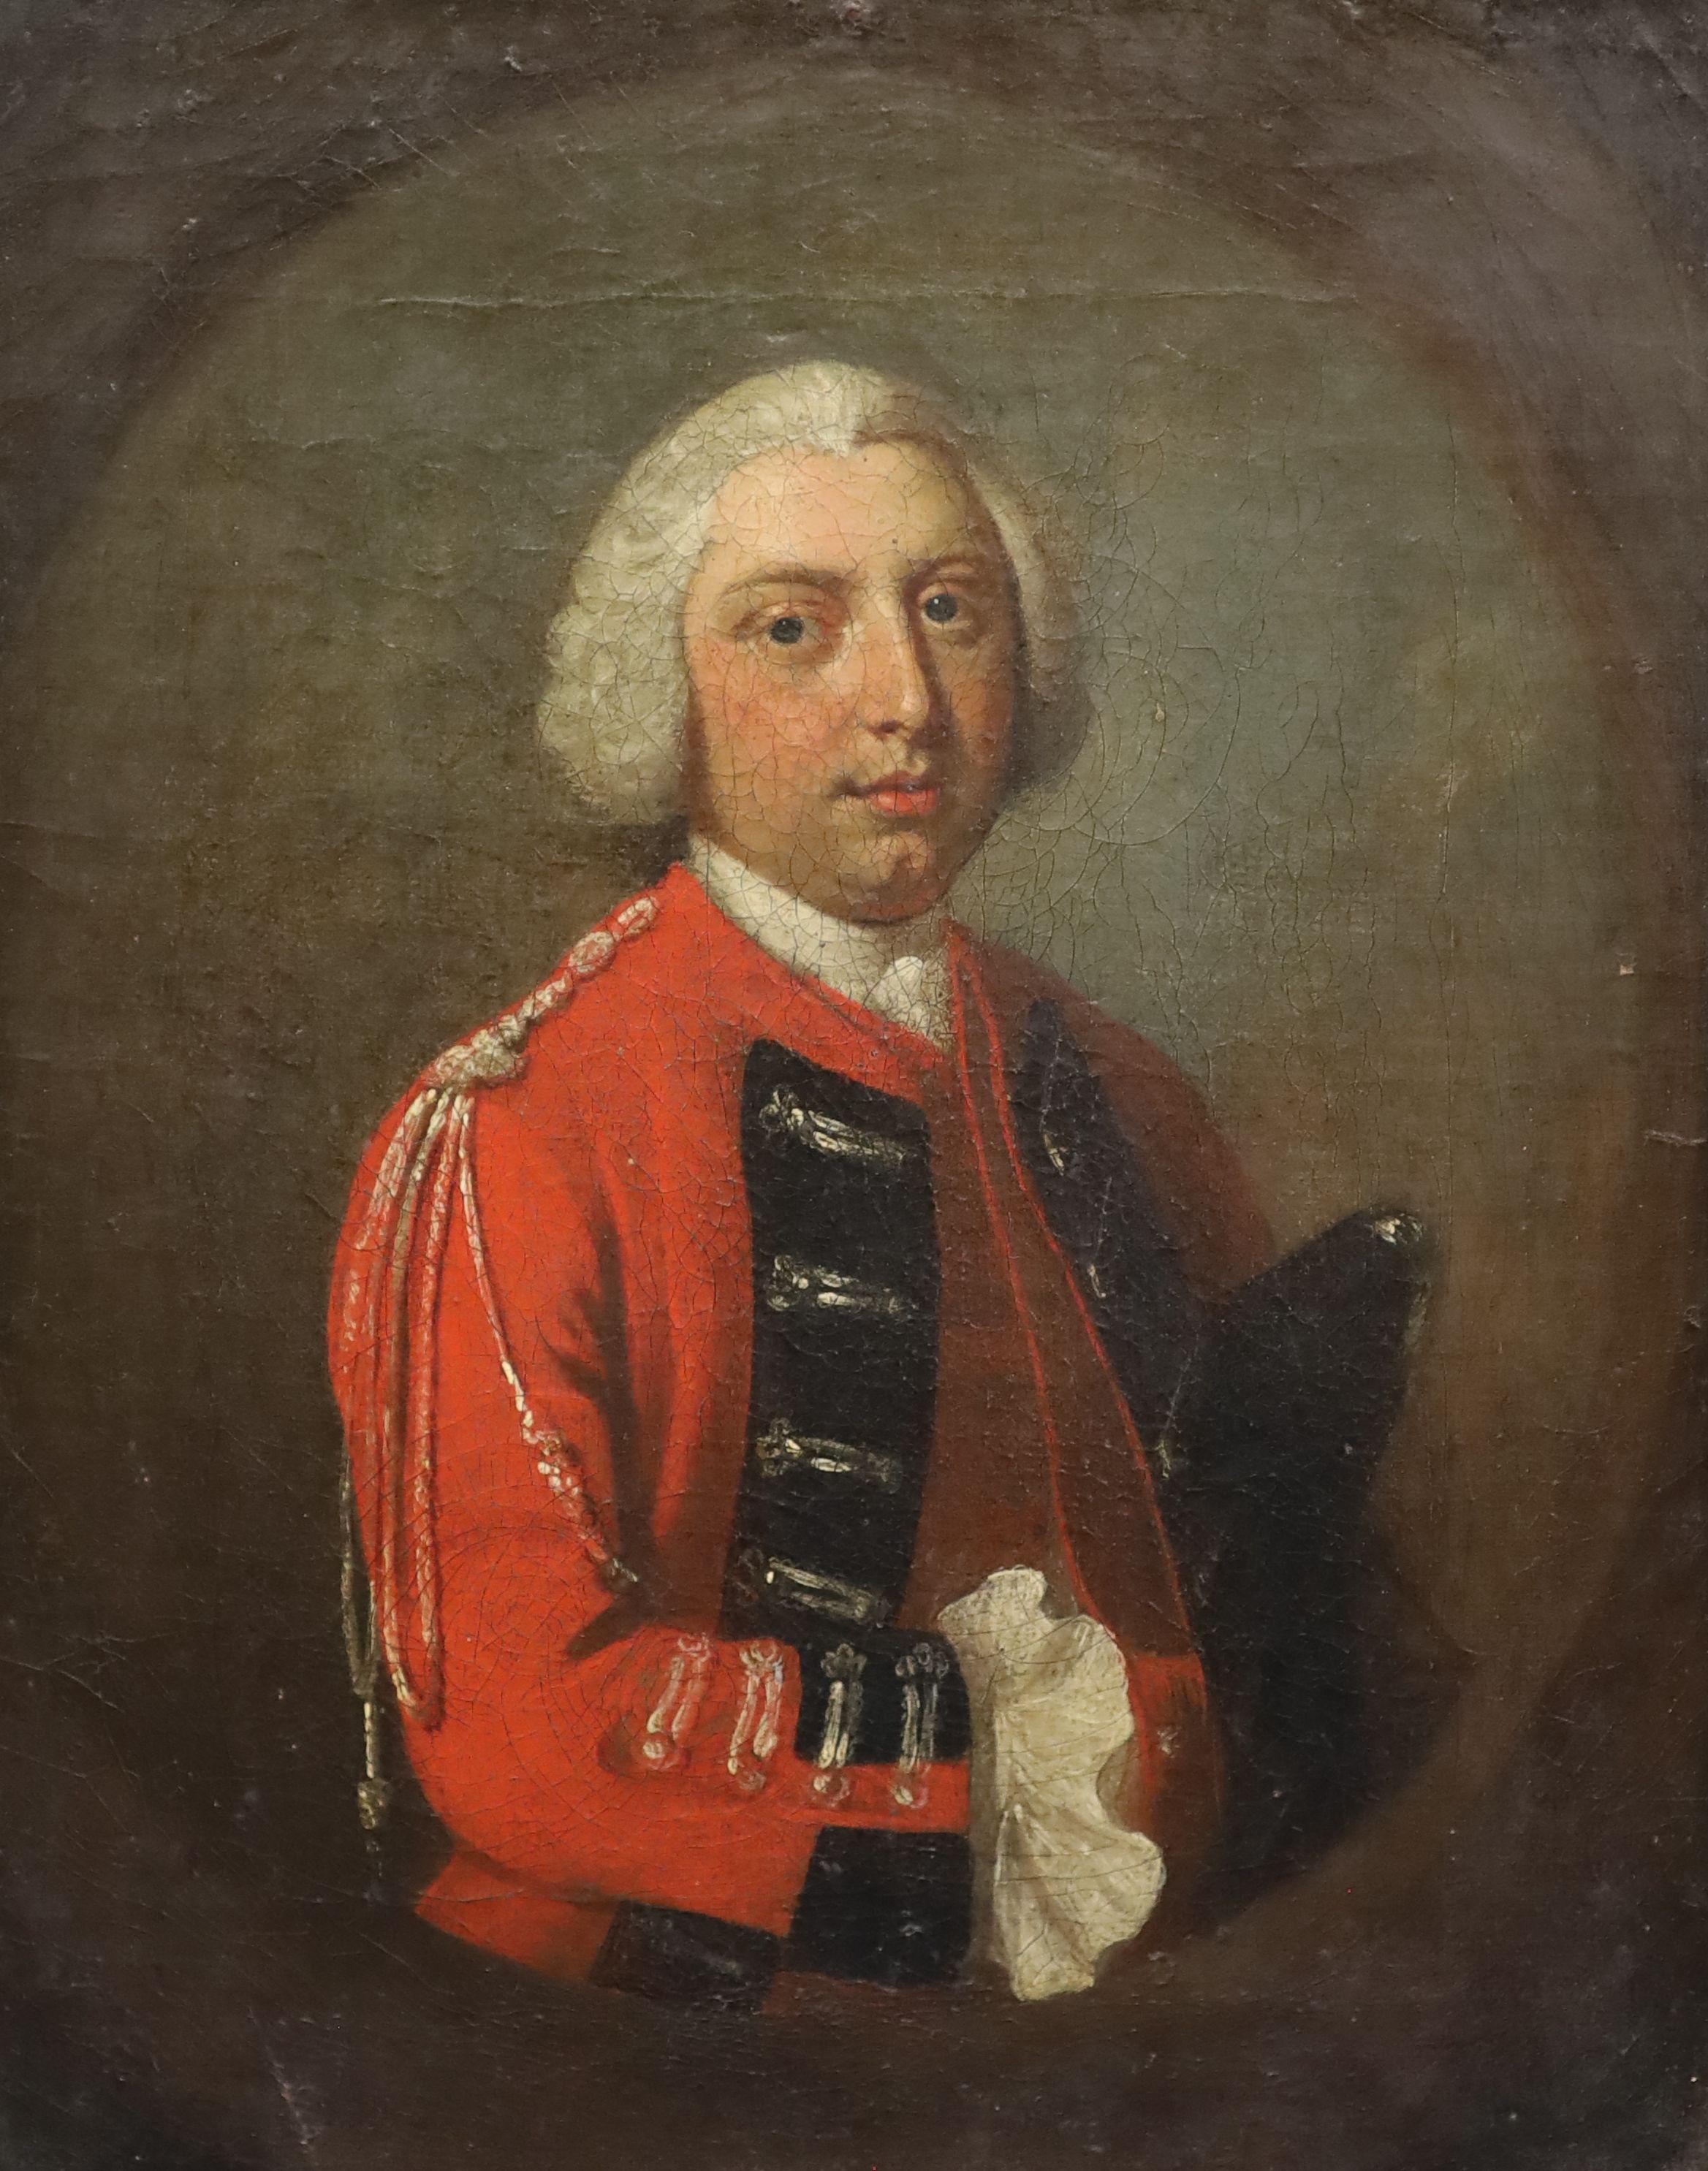 Mid 18th century English School , Portrait of an army officer wearing a scarlet coat, oil on canvas, 30.5 x 24cm